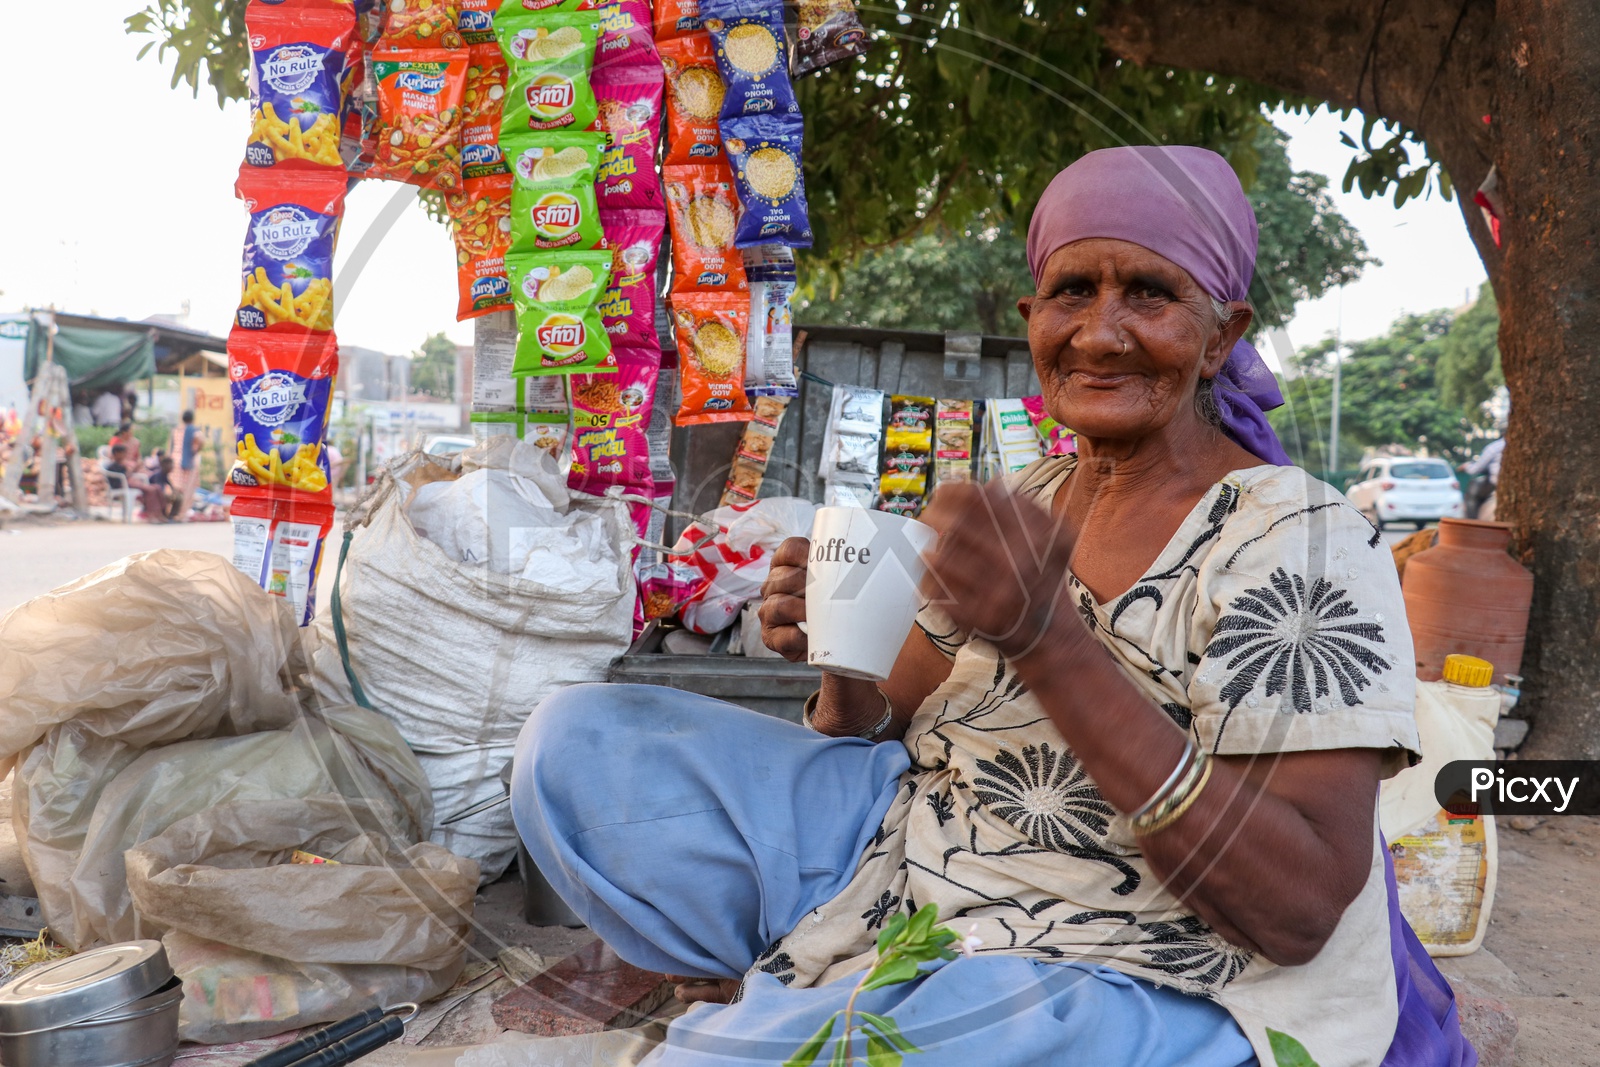 An Old Woman Having Tea In a Cup At a Road Side vendor Stall